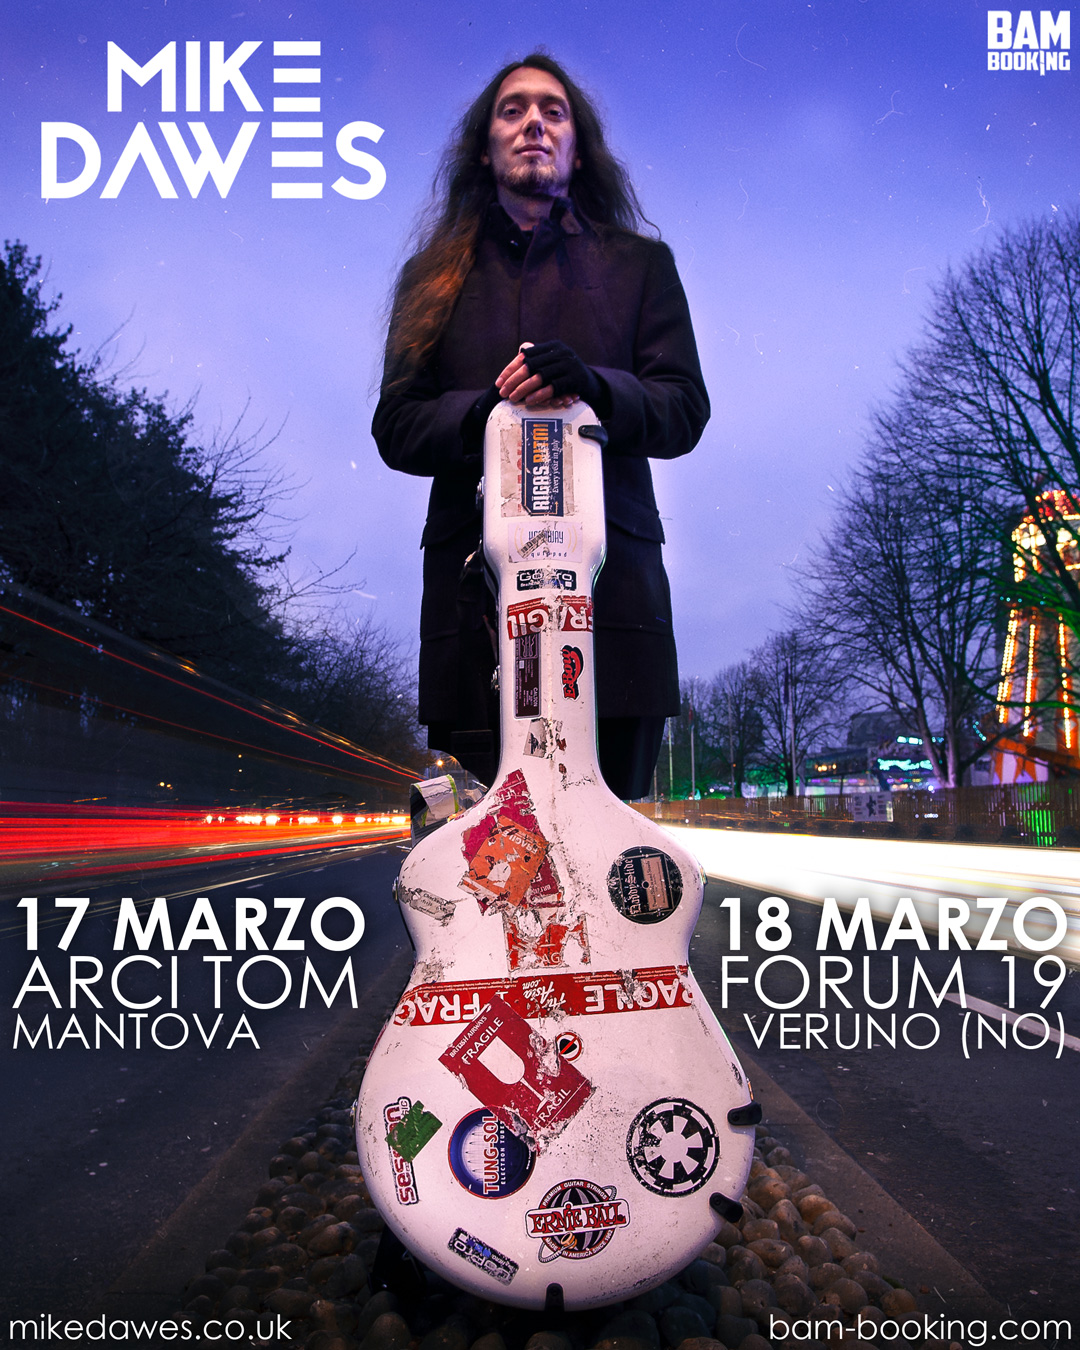 Mike Dawes, due date in Italia a marzo